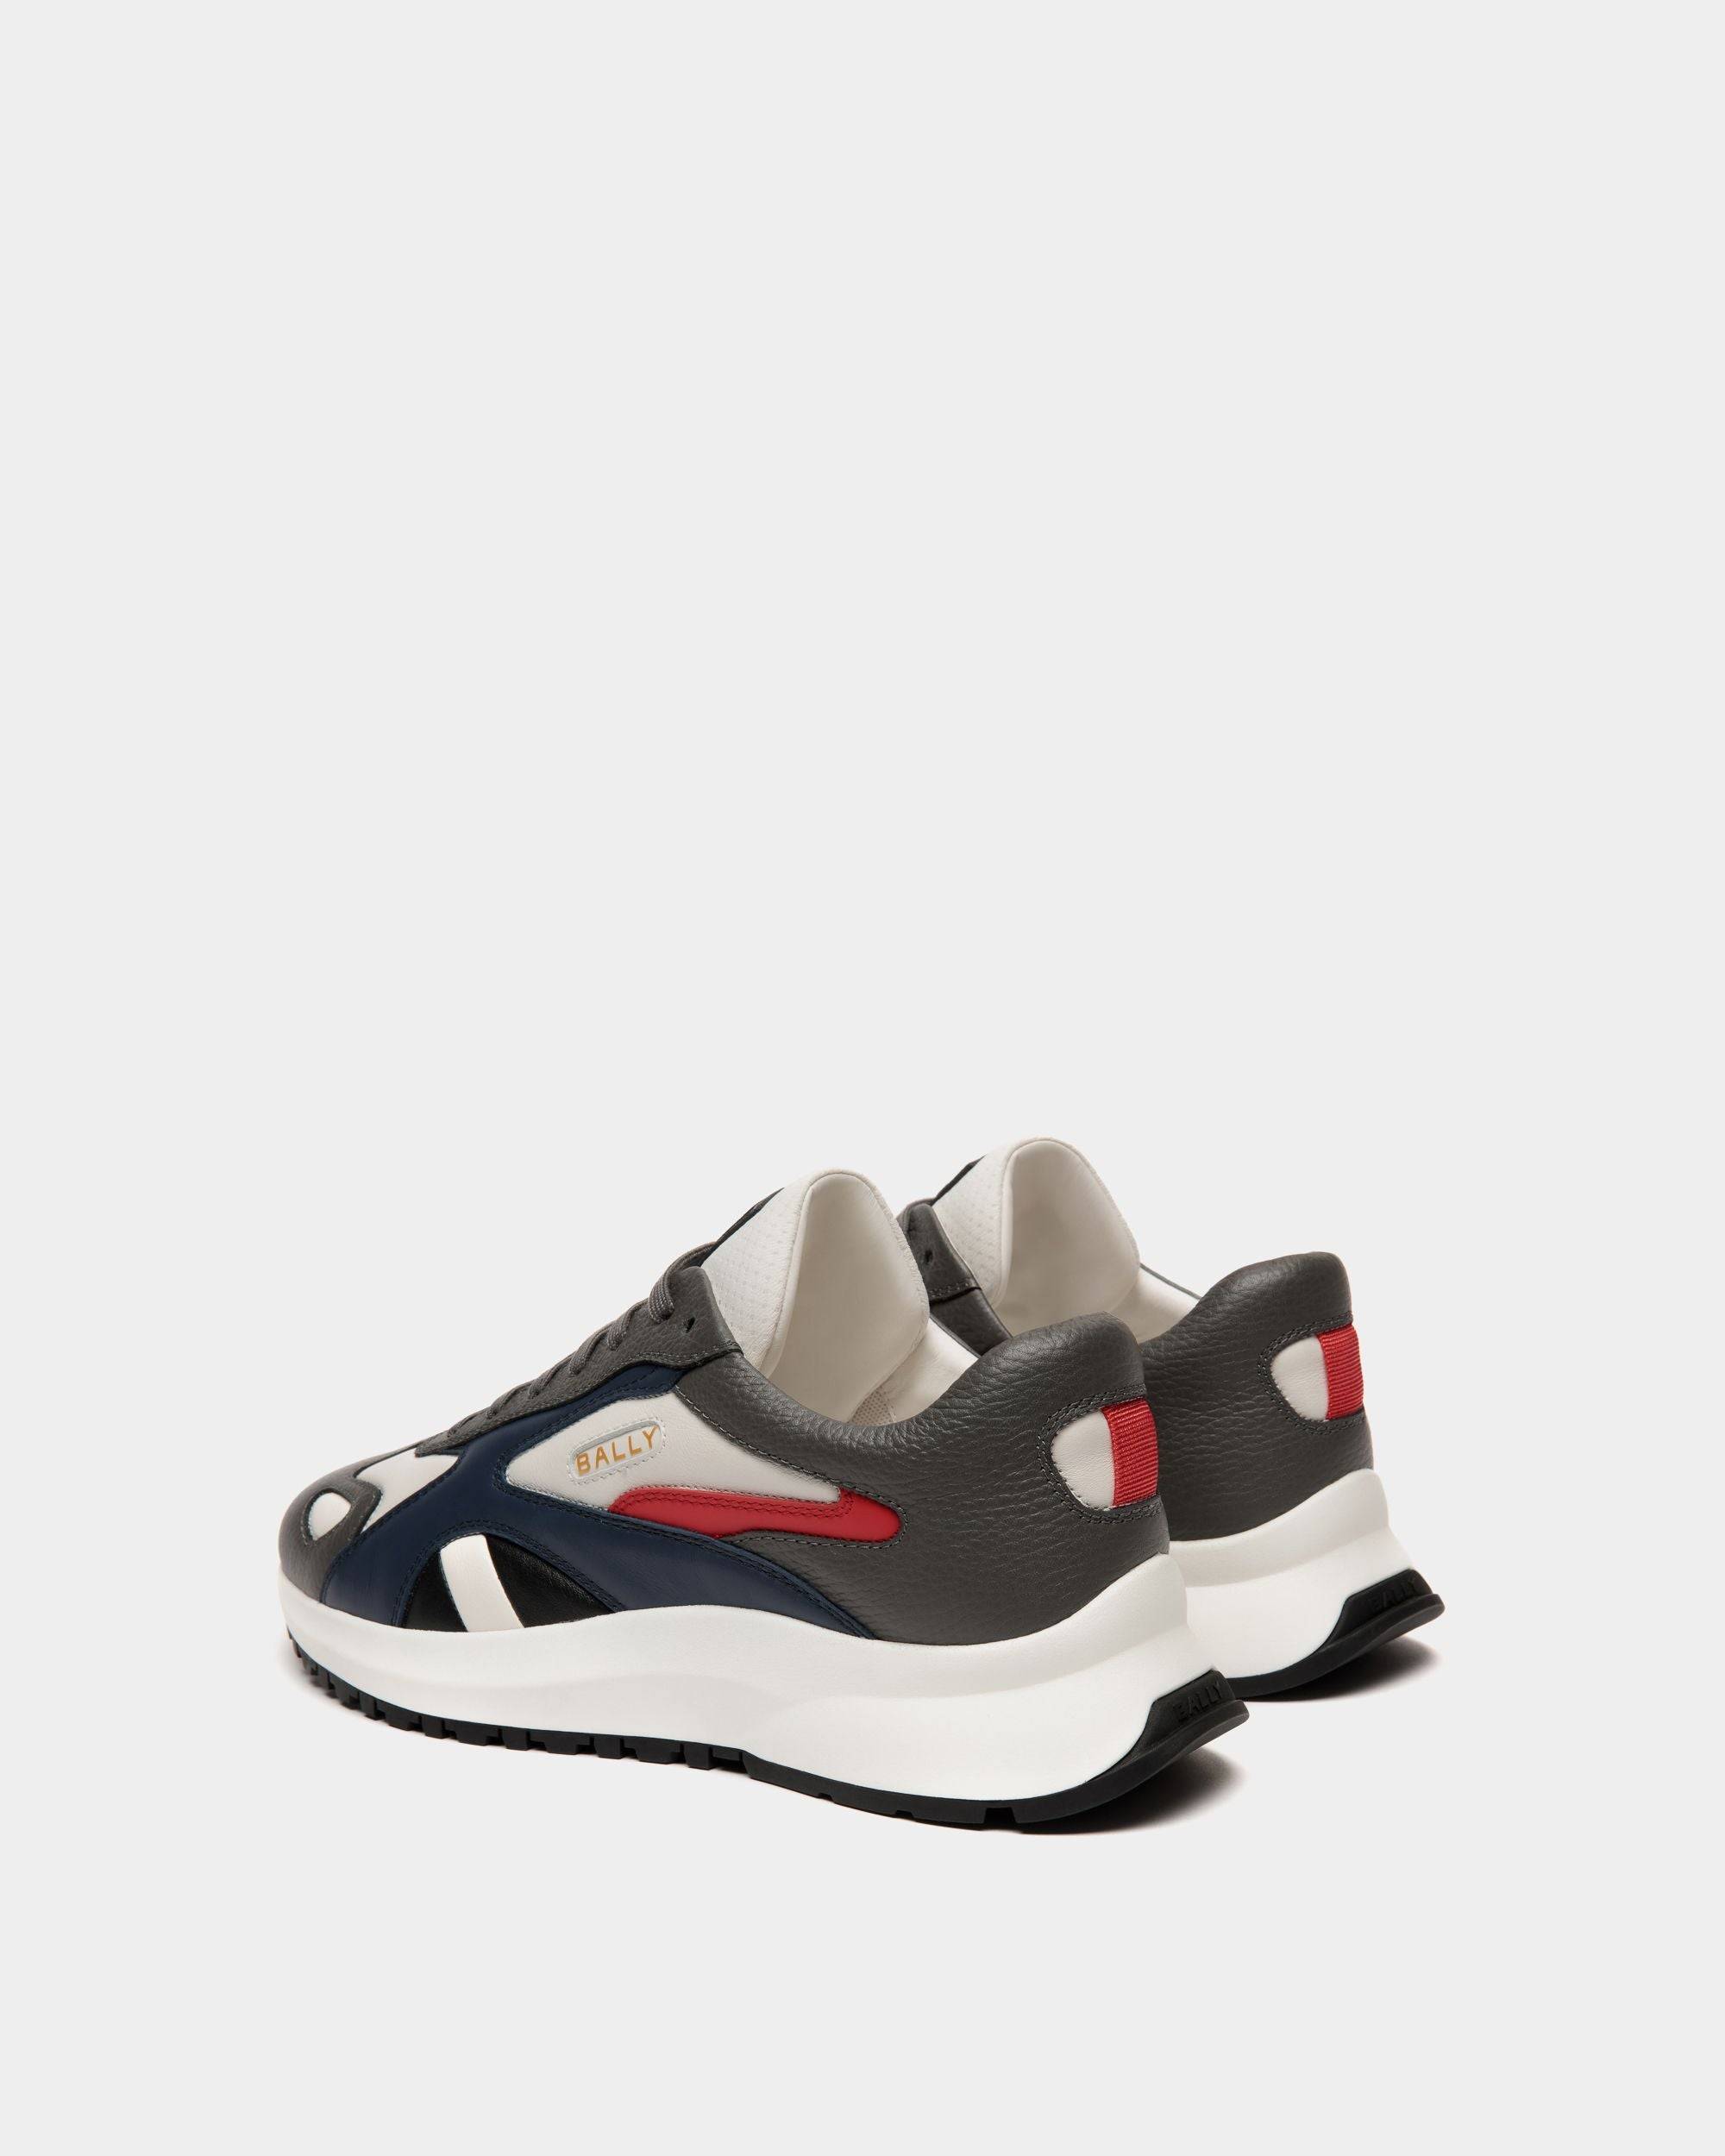 Outline | Men's Sneaker in Multicolor Leather | Bally | Still Life 3/4 Front